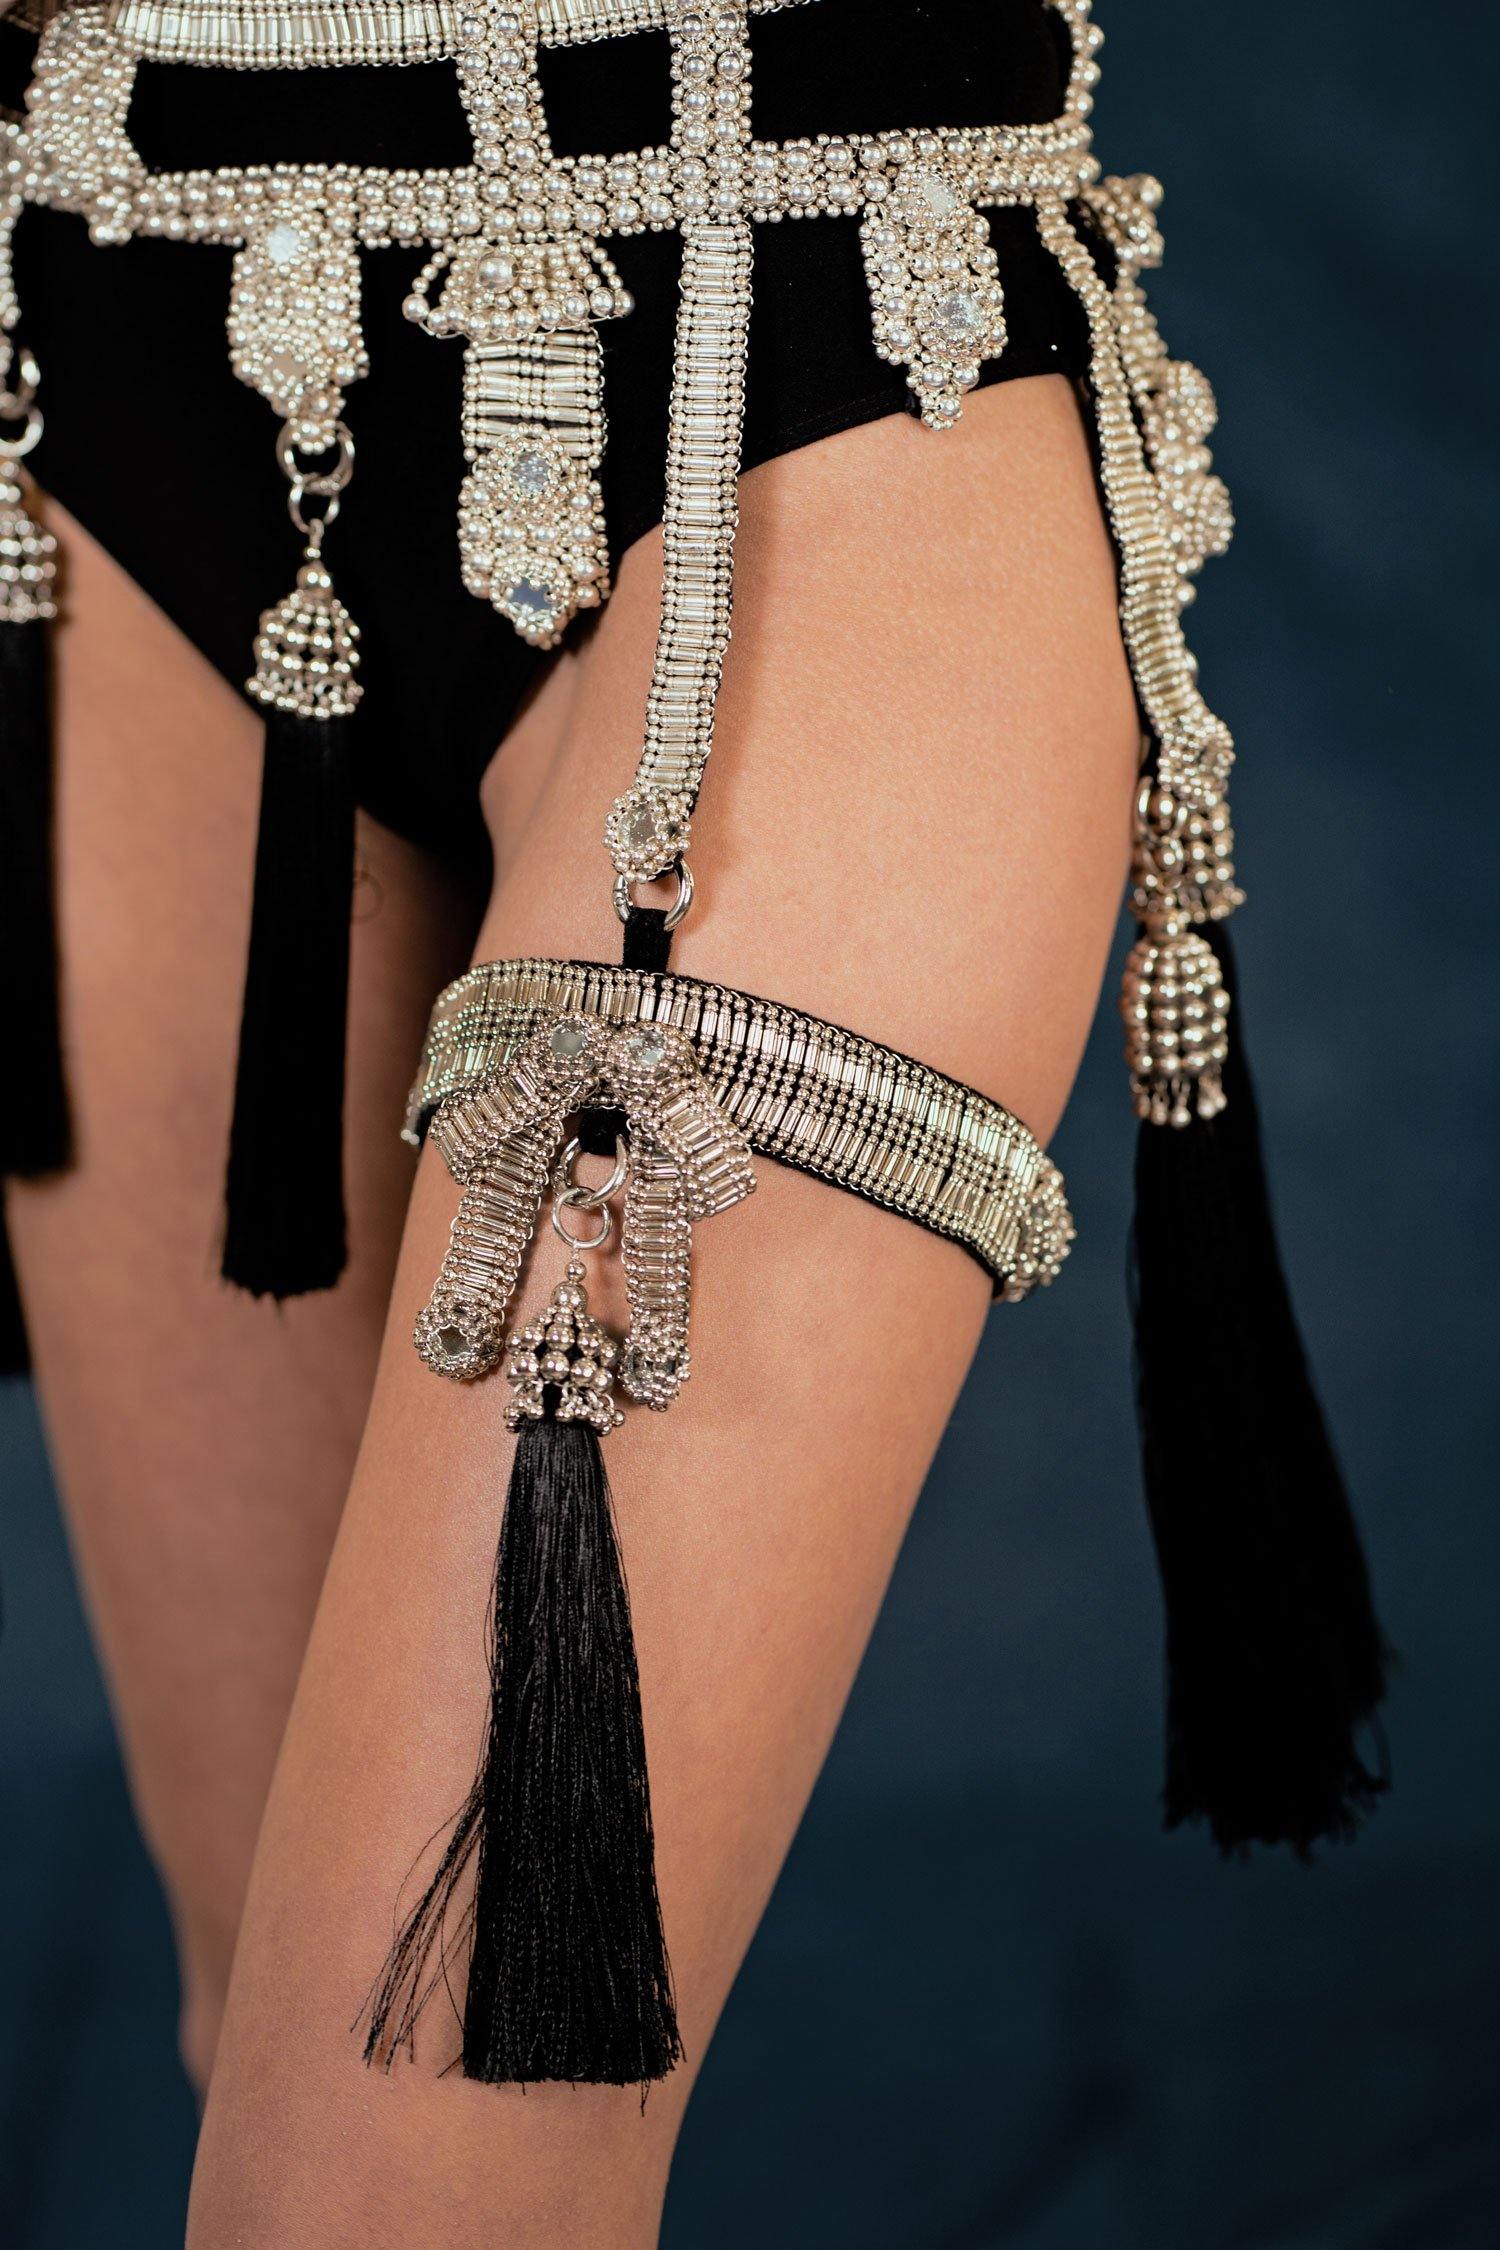 Amaya Garter Band by Object and Dawn. Power is sexy. You'll feel both wearing this one.   Our skilled artisans use an ancient and disappearing technique to construct your piece. Made with high quality metal beads that are coated in polymer to preserve shine and ensure the item is hypoallergenic. The garter band is fully lined by hand in luxurious velvet and has an adjustable elastic strap to comfortably fit to your thigh circumference.